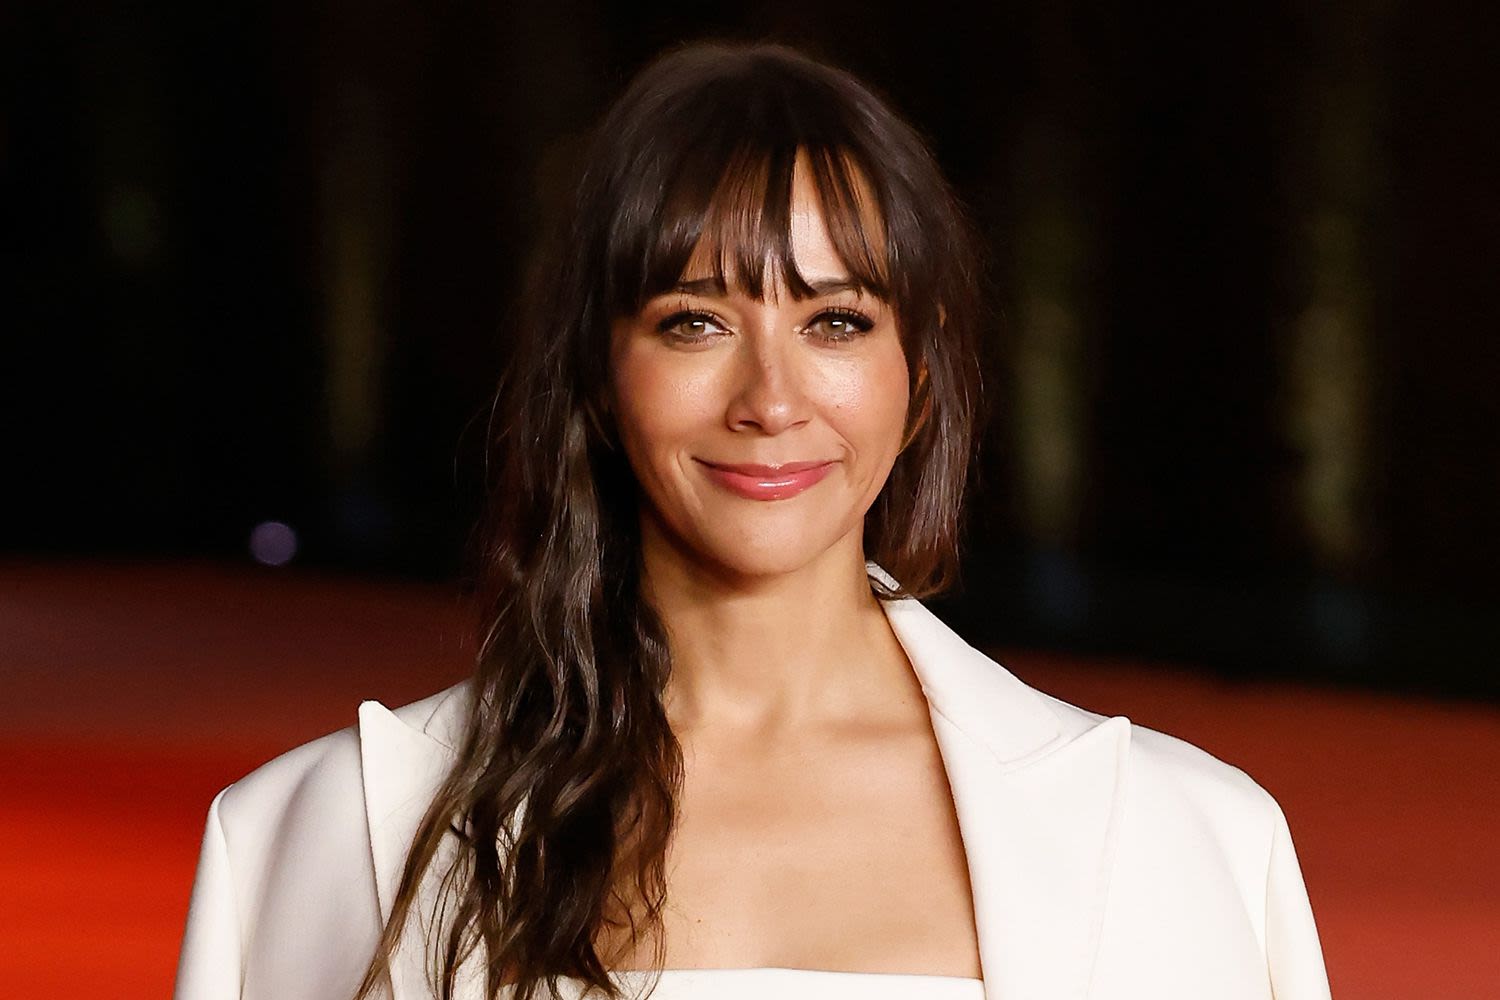 Rashida Jones Reveals the Japanese Locals that ‘Got a Little Nippy’ with Her During Trip with 'My Husband and Son’